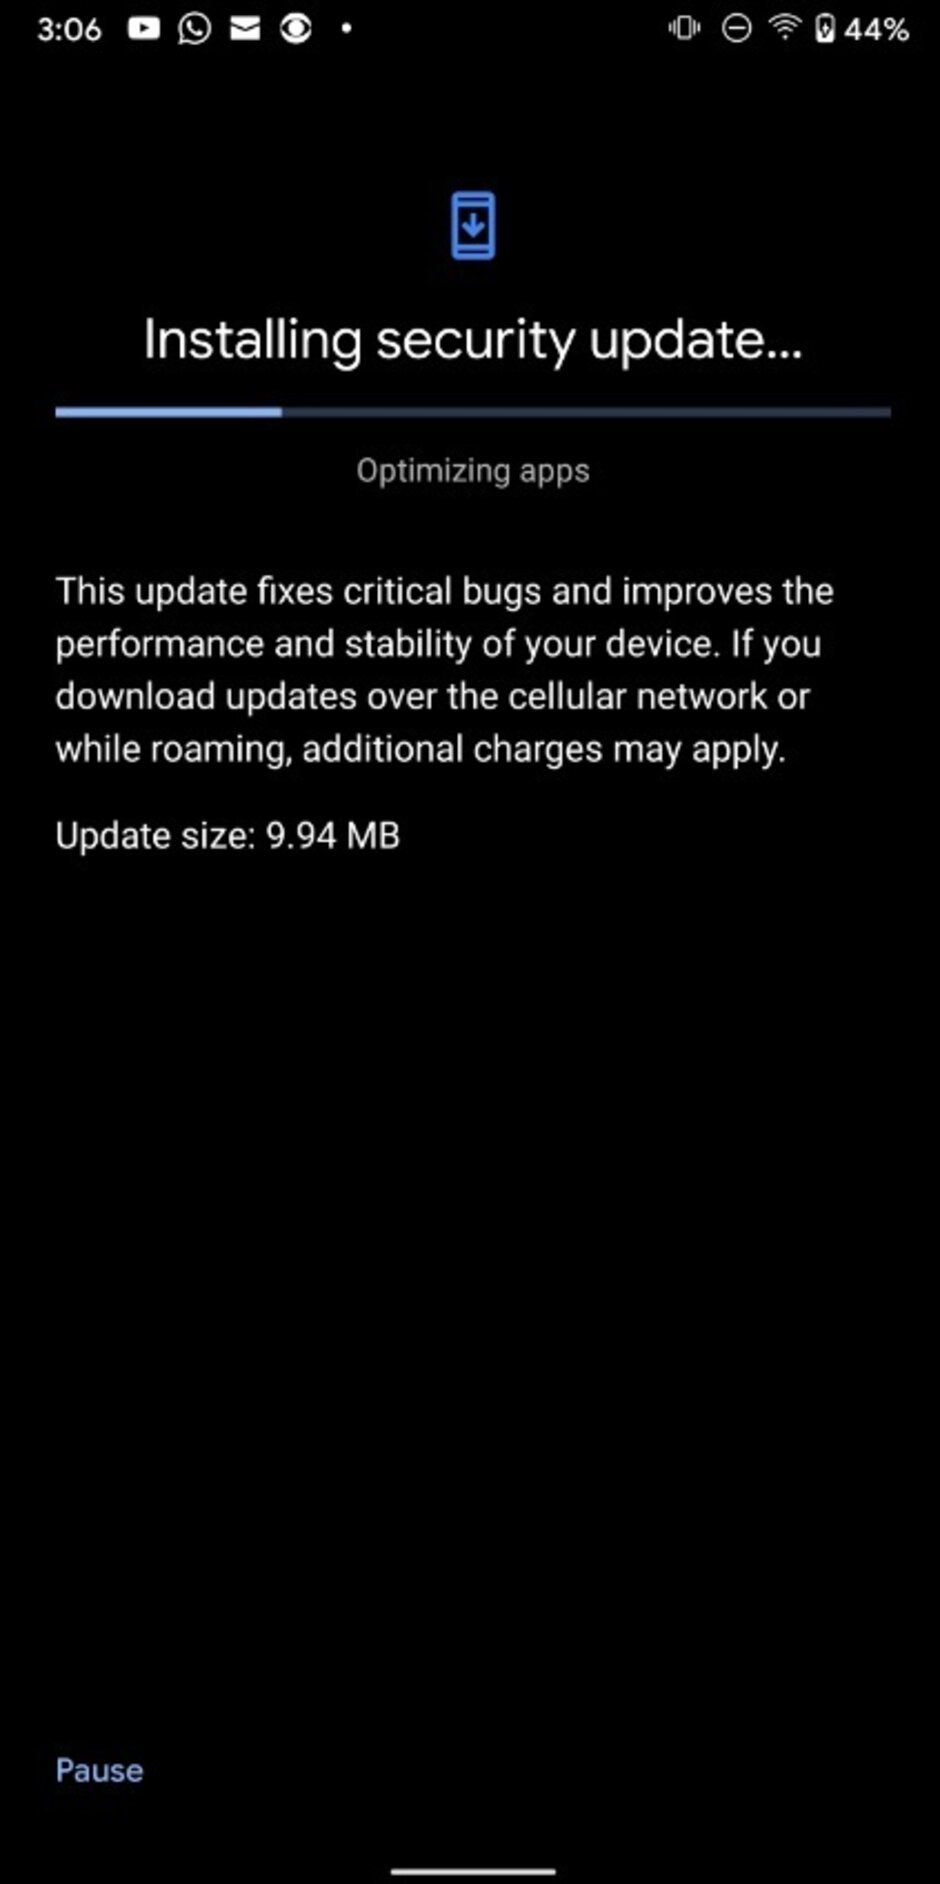 The monthly Pixel update has been released - Monthly update gives Pixel 4 owners something they really wanted